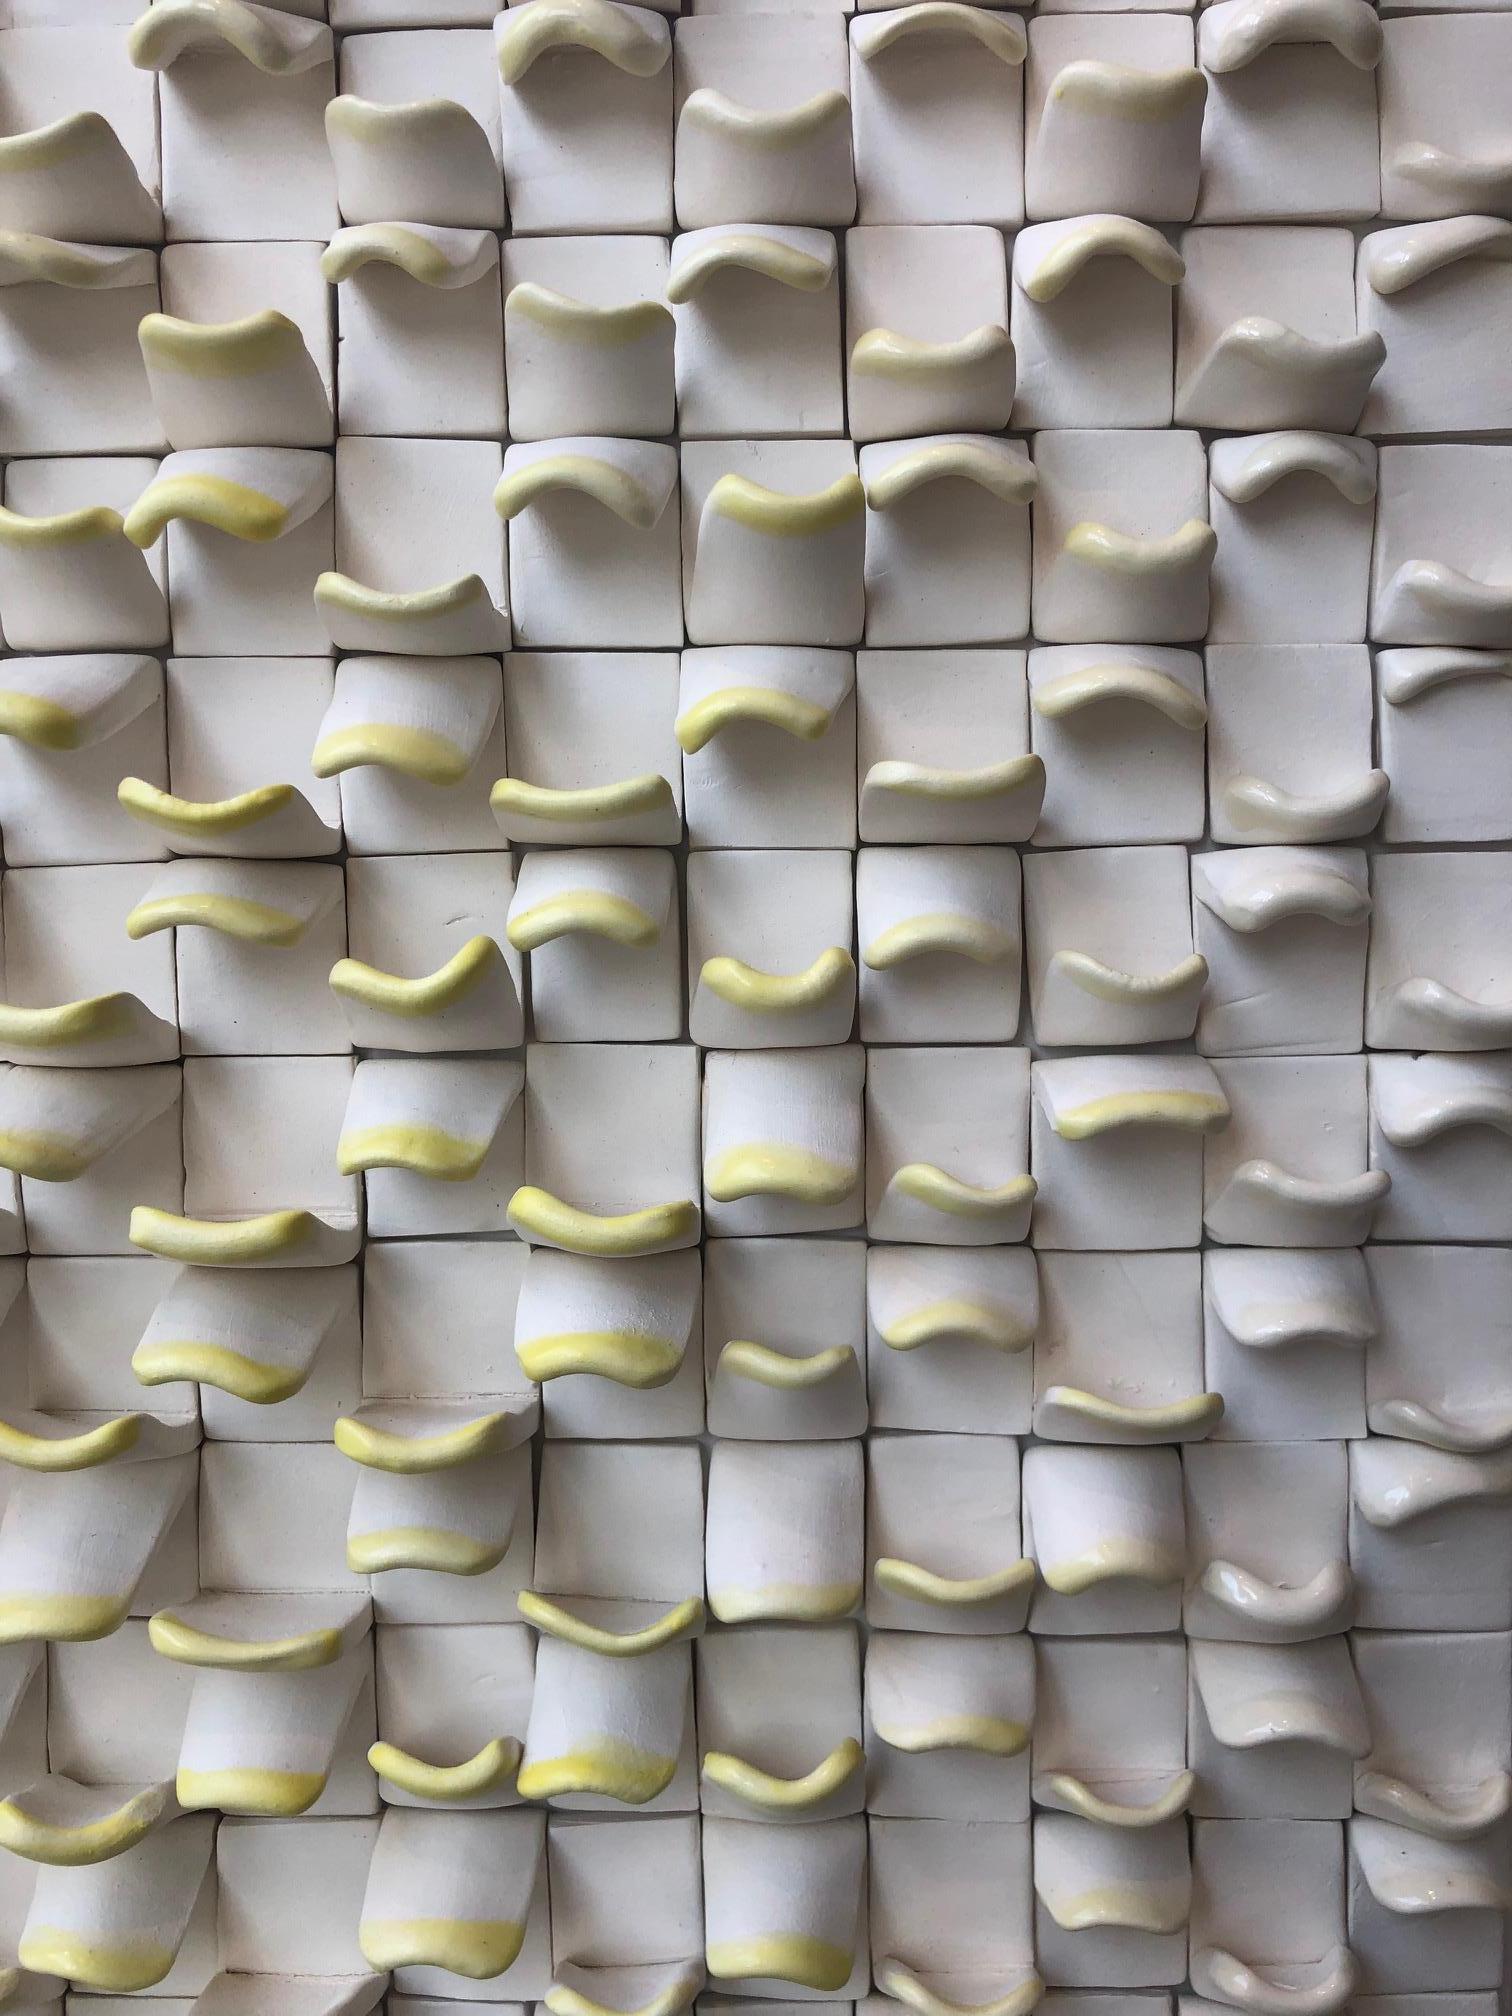 Allegro I / ceramic wall sculpture - white with ivory / yellow - Brown Abstract Sculpture by Jane B. Grimm